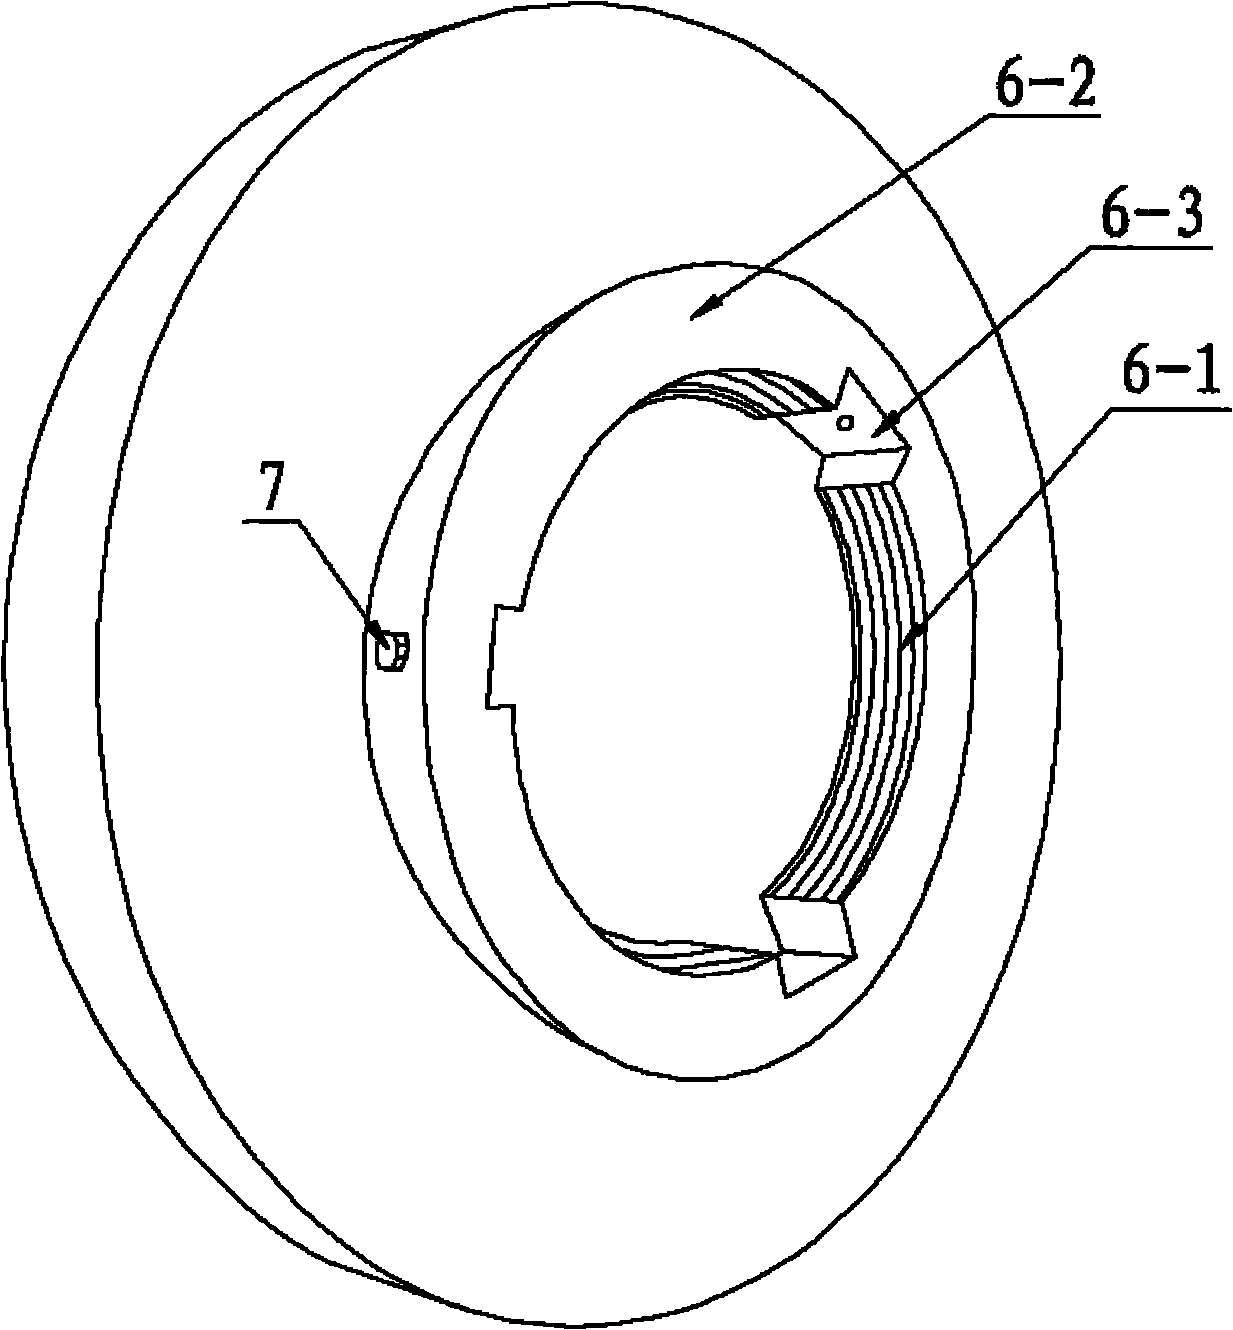 Sealing device for main shaft of numerical control machine tool